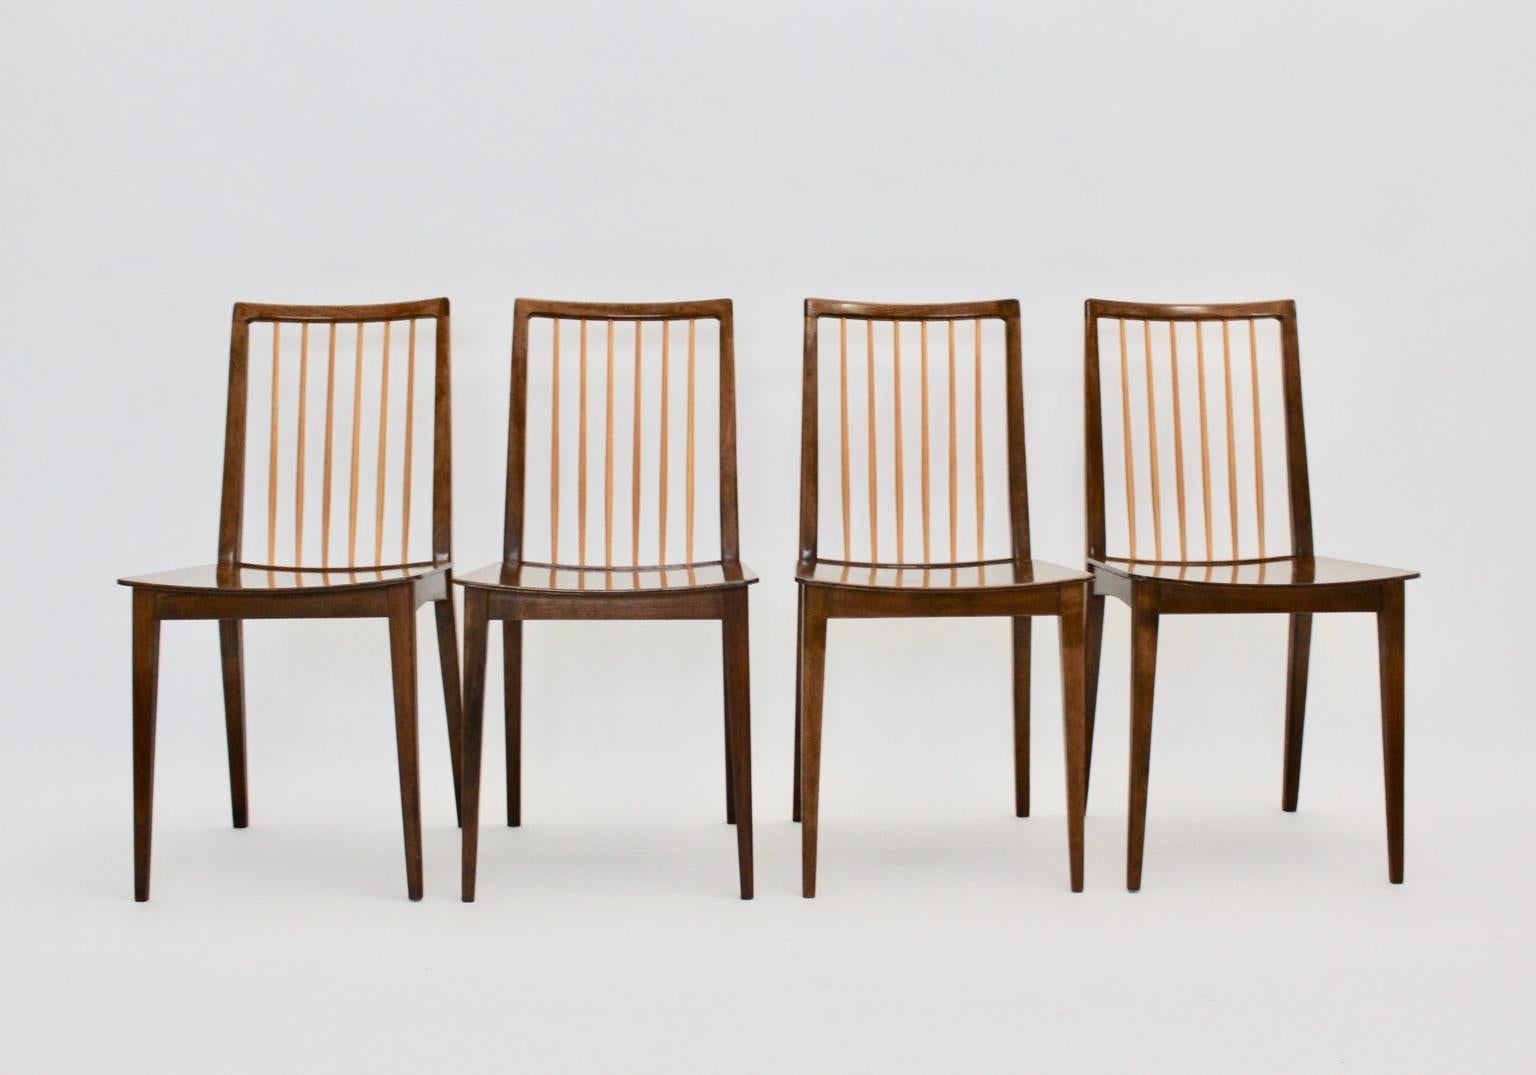 Mid century Modern set of four dining chairs by Oskar Payer attributed, Vienna circa 1950, which shows timeless elegance.
The dining chairs were made of solid beechwood - brown stained and lacquered. The back of the dining chair shows 5 bright